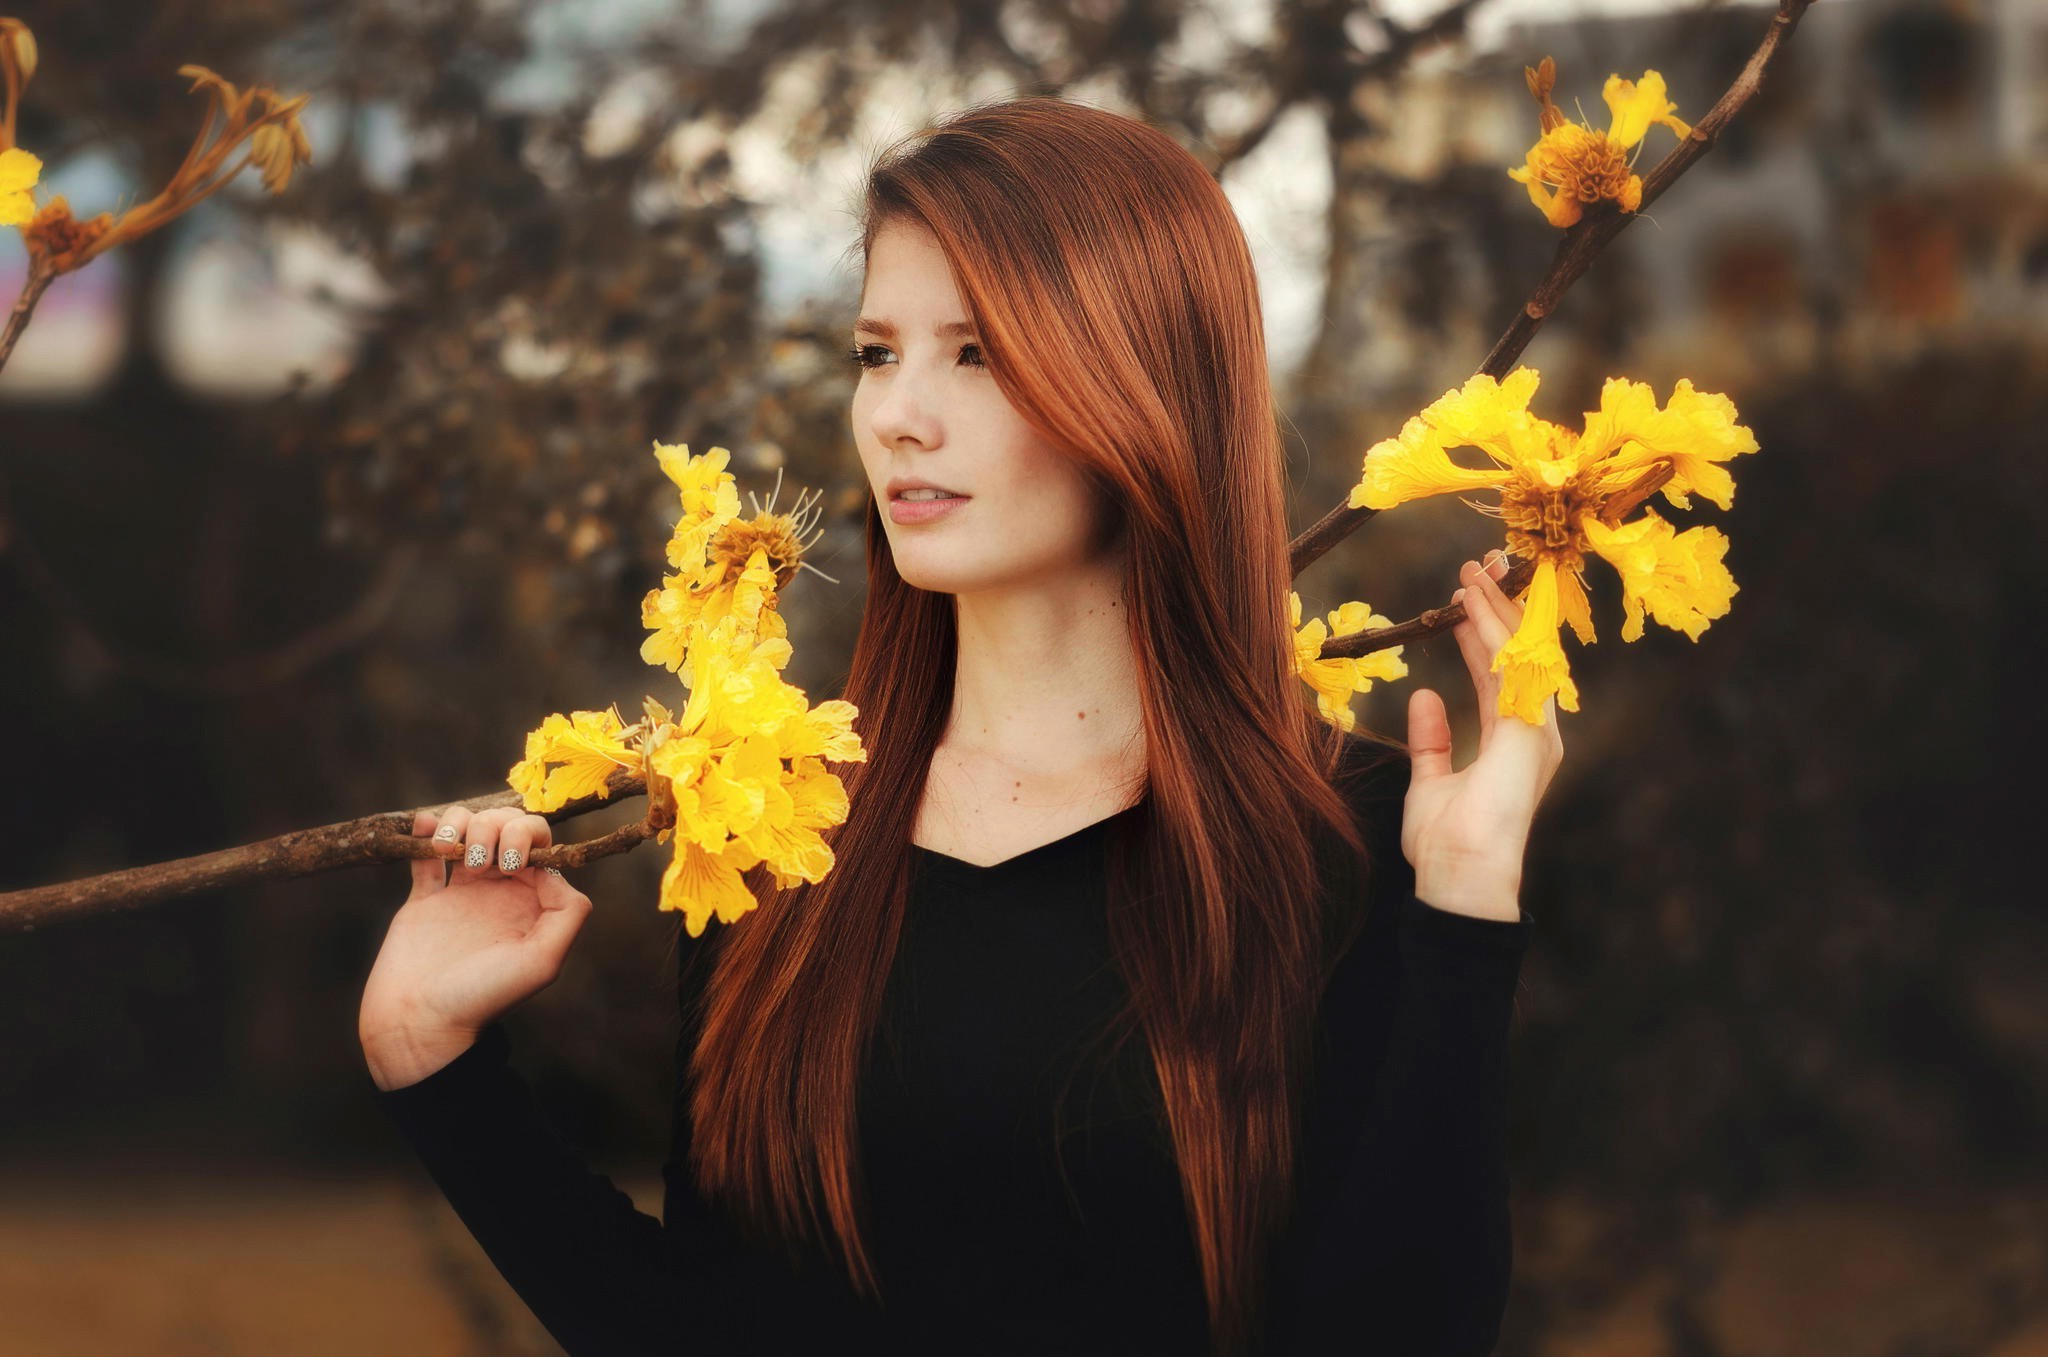 women, Hair, Model, Nature, Trees, Forest, Redhead, Spring Wallpaper